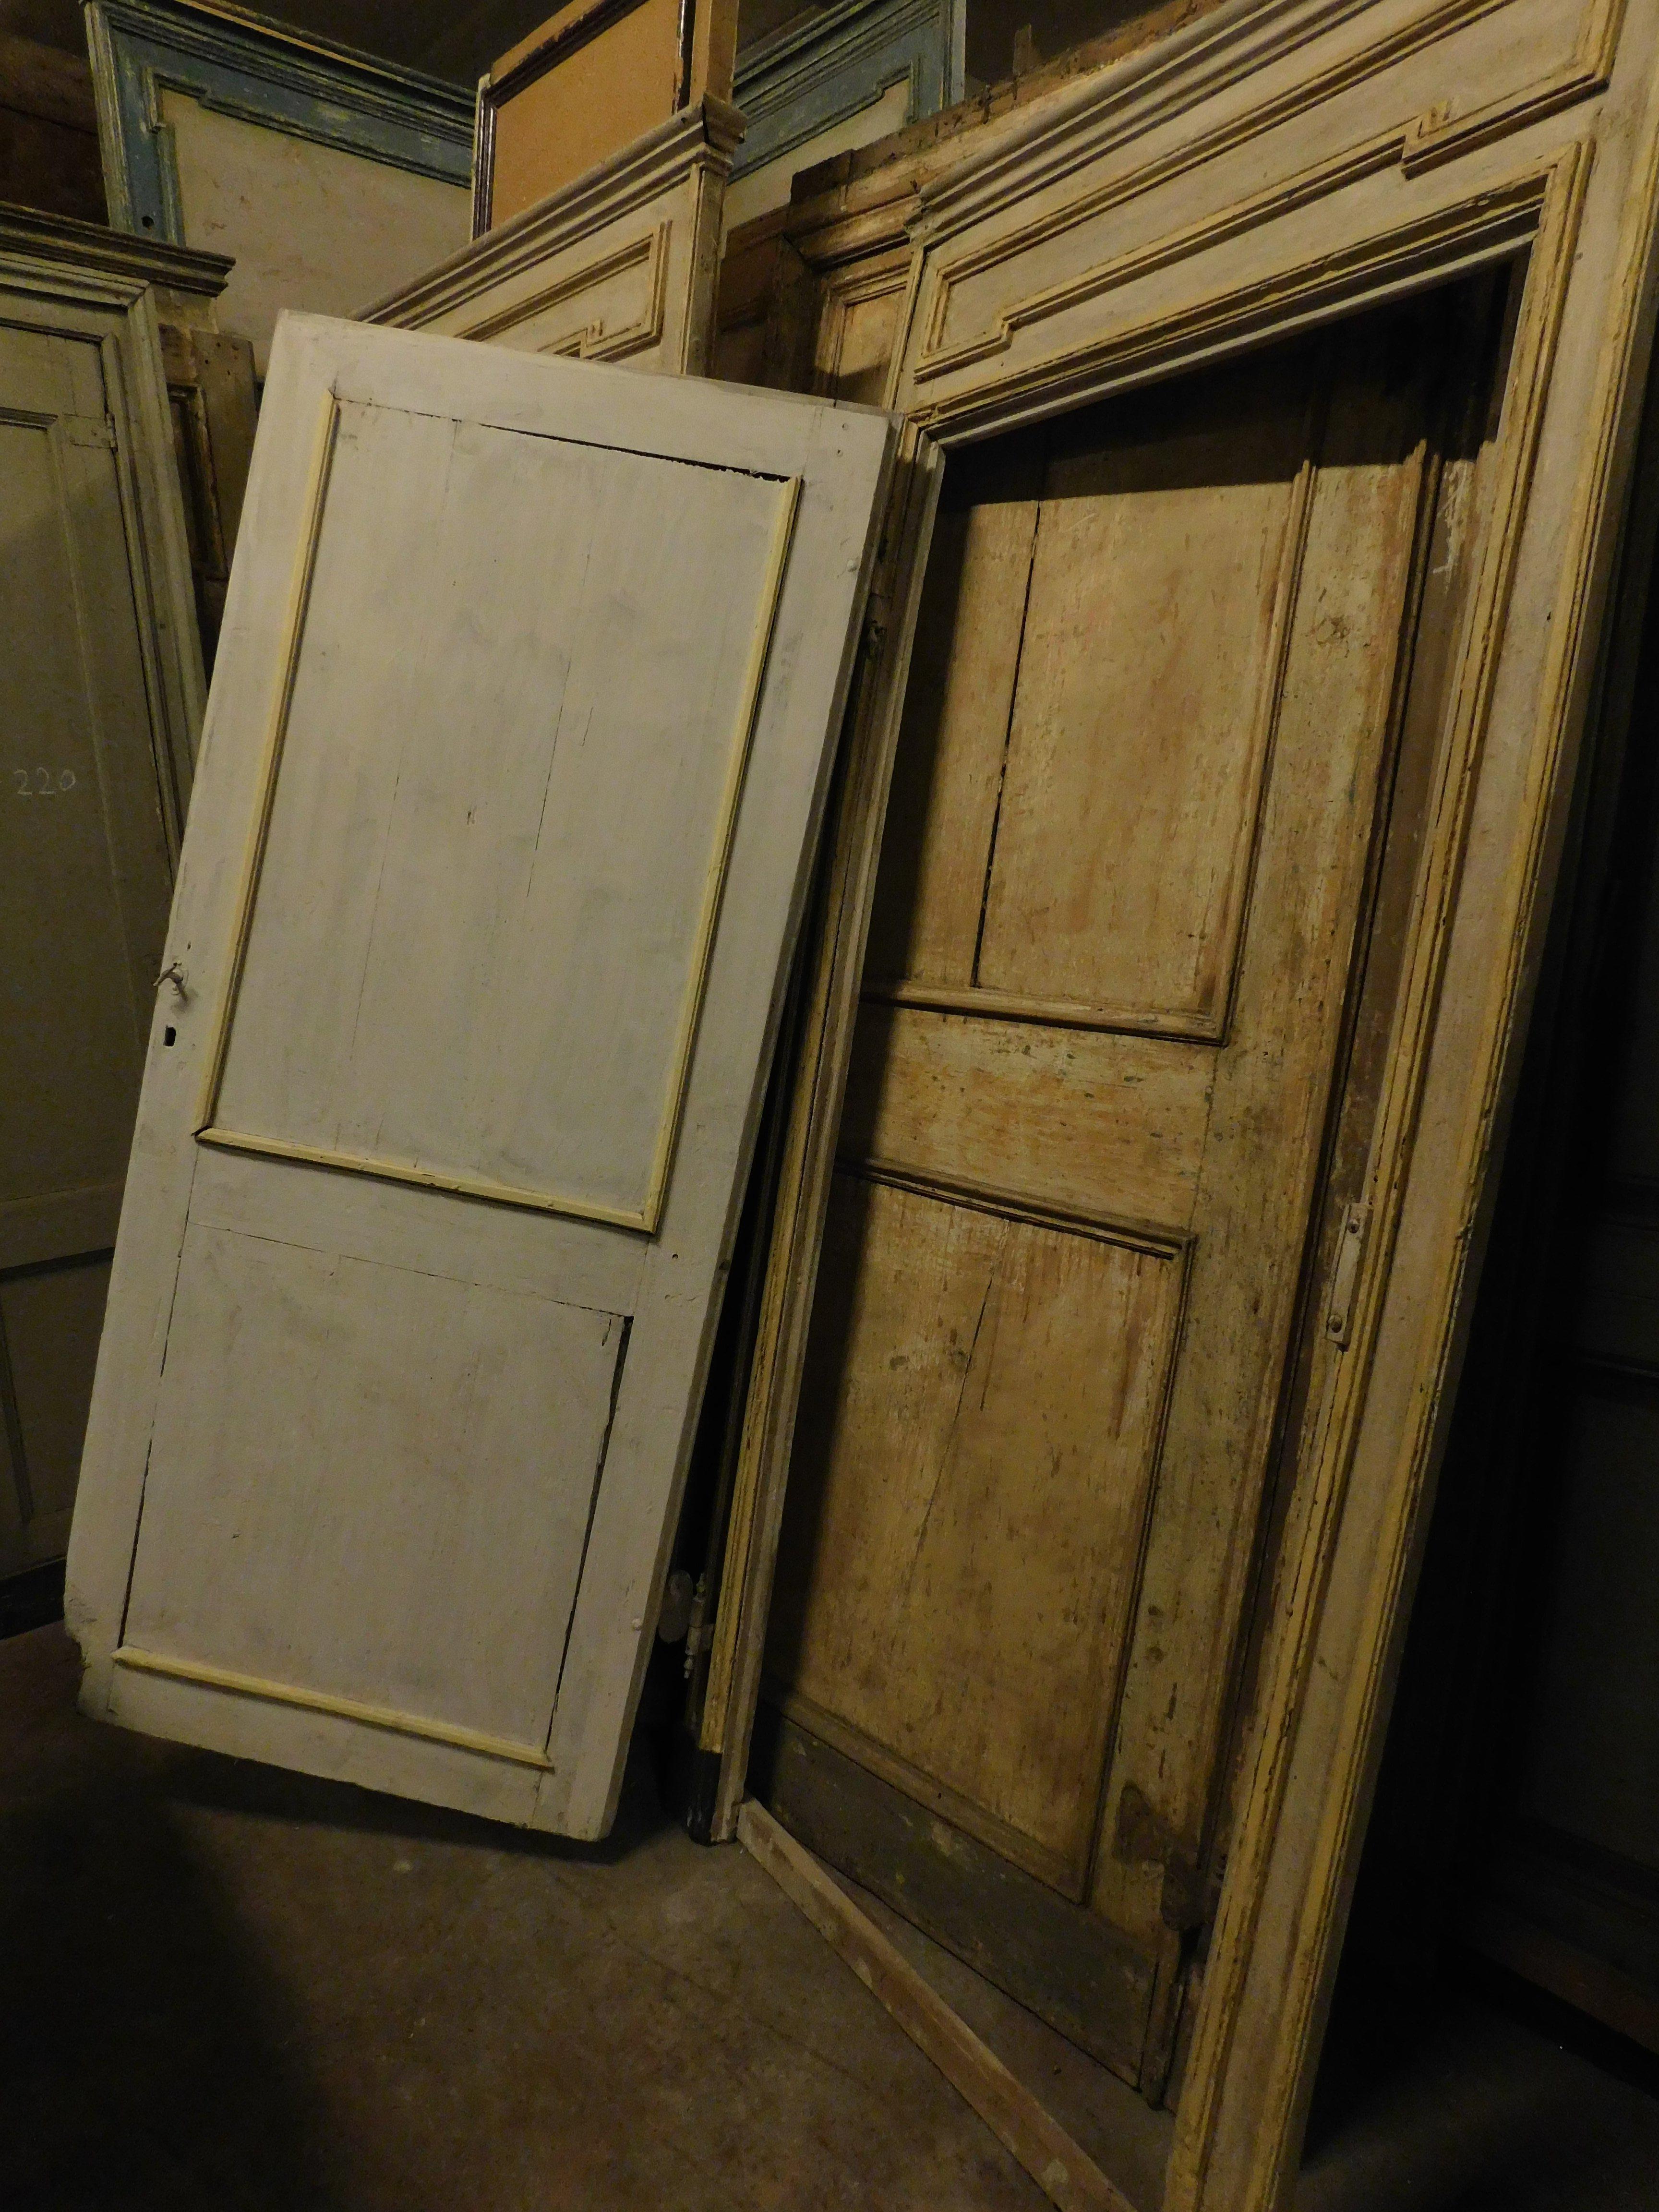 Set of 2 Painted and Lacquered Interior Doors with Frame, 18th Century, Italy For Sale 1